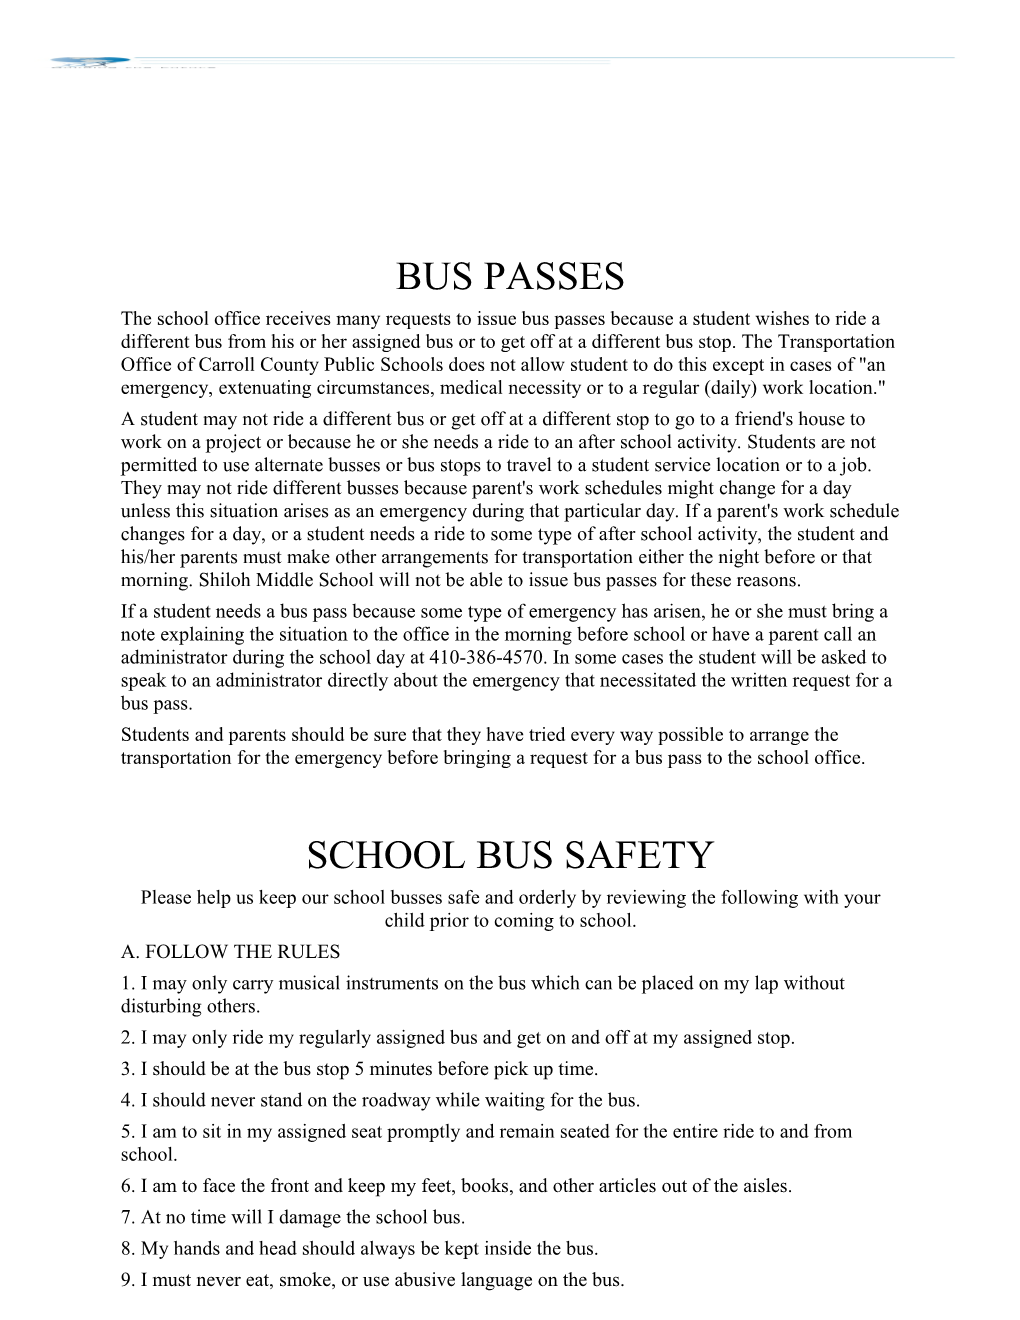 The School Office Receives Many Requests to Issue Bus Passes Because a Student Wishes To